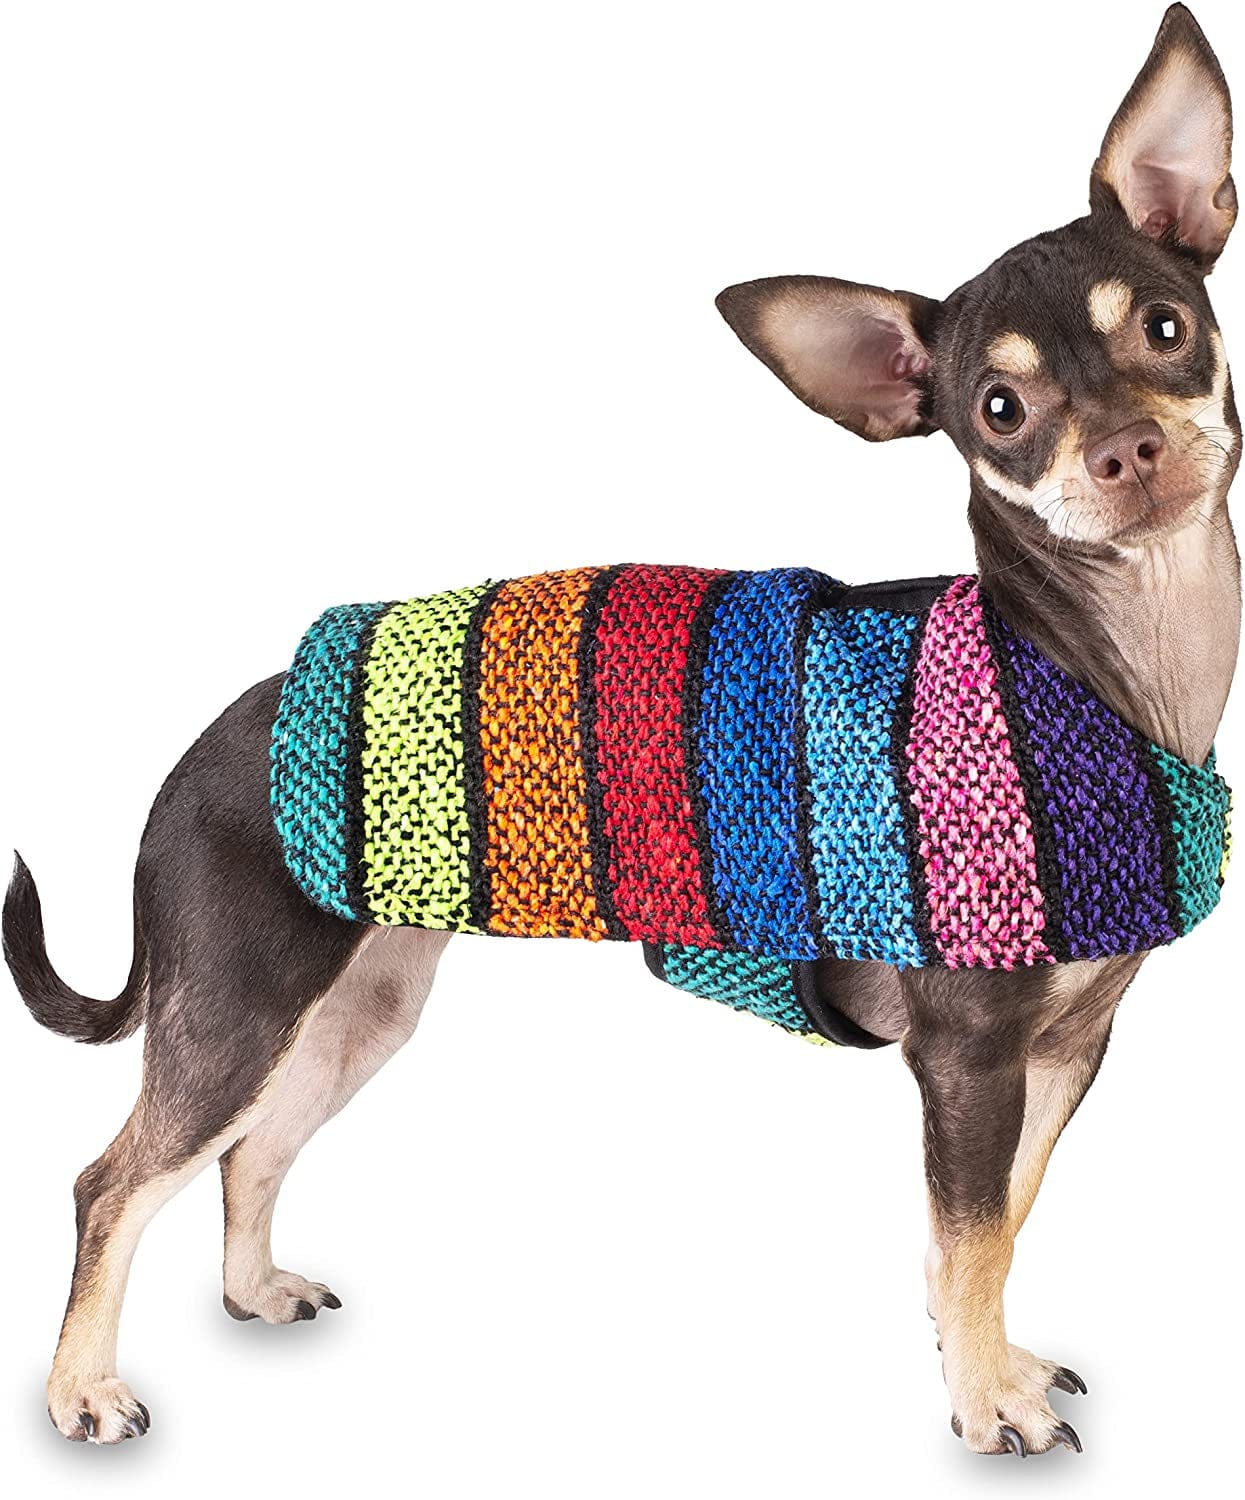 Dog Clothes - Handmade Dog Poncho - Cinco De Mayo Chihuahua Costume from Authentic Mexican Blanket (Blue, XXS) Animals & Pet Supplies > Pet Supplies > Dog Supplies > Dog Apparel Baja Ponchos Multi Color XX-Large 